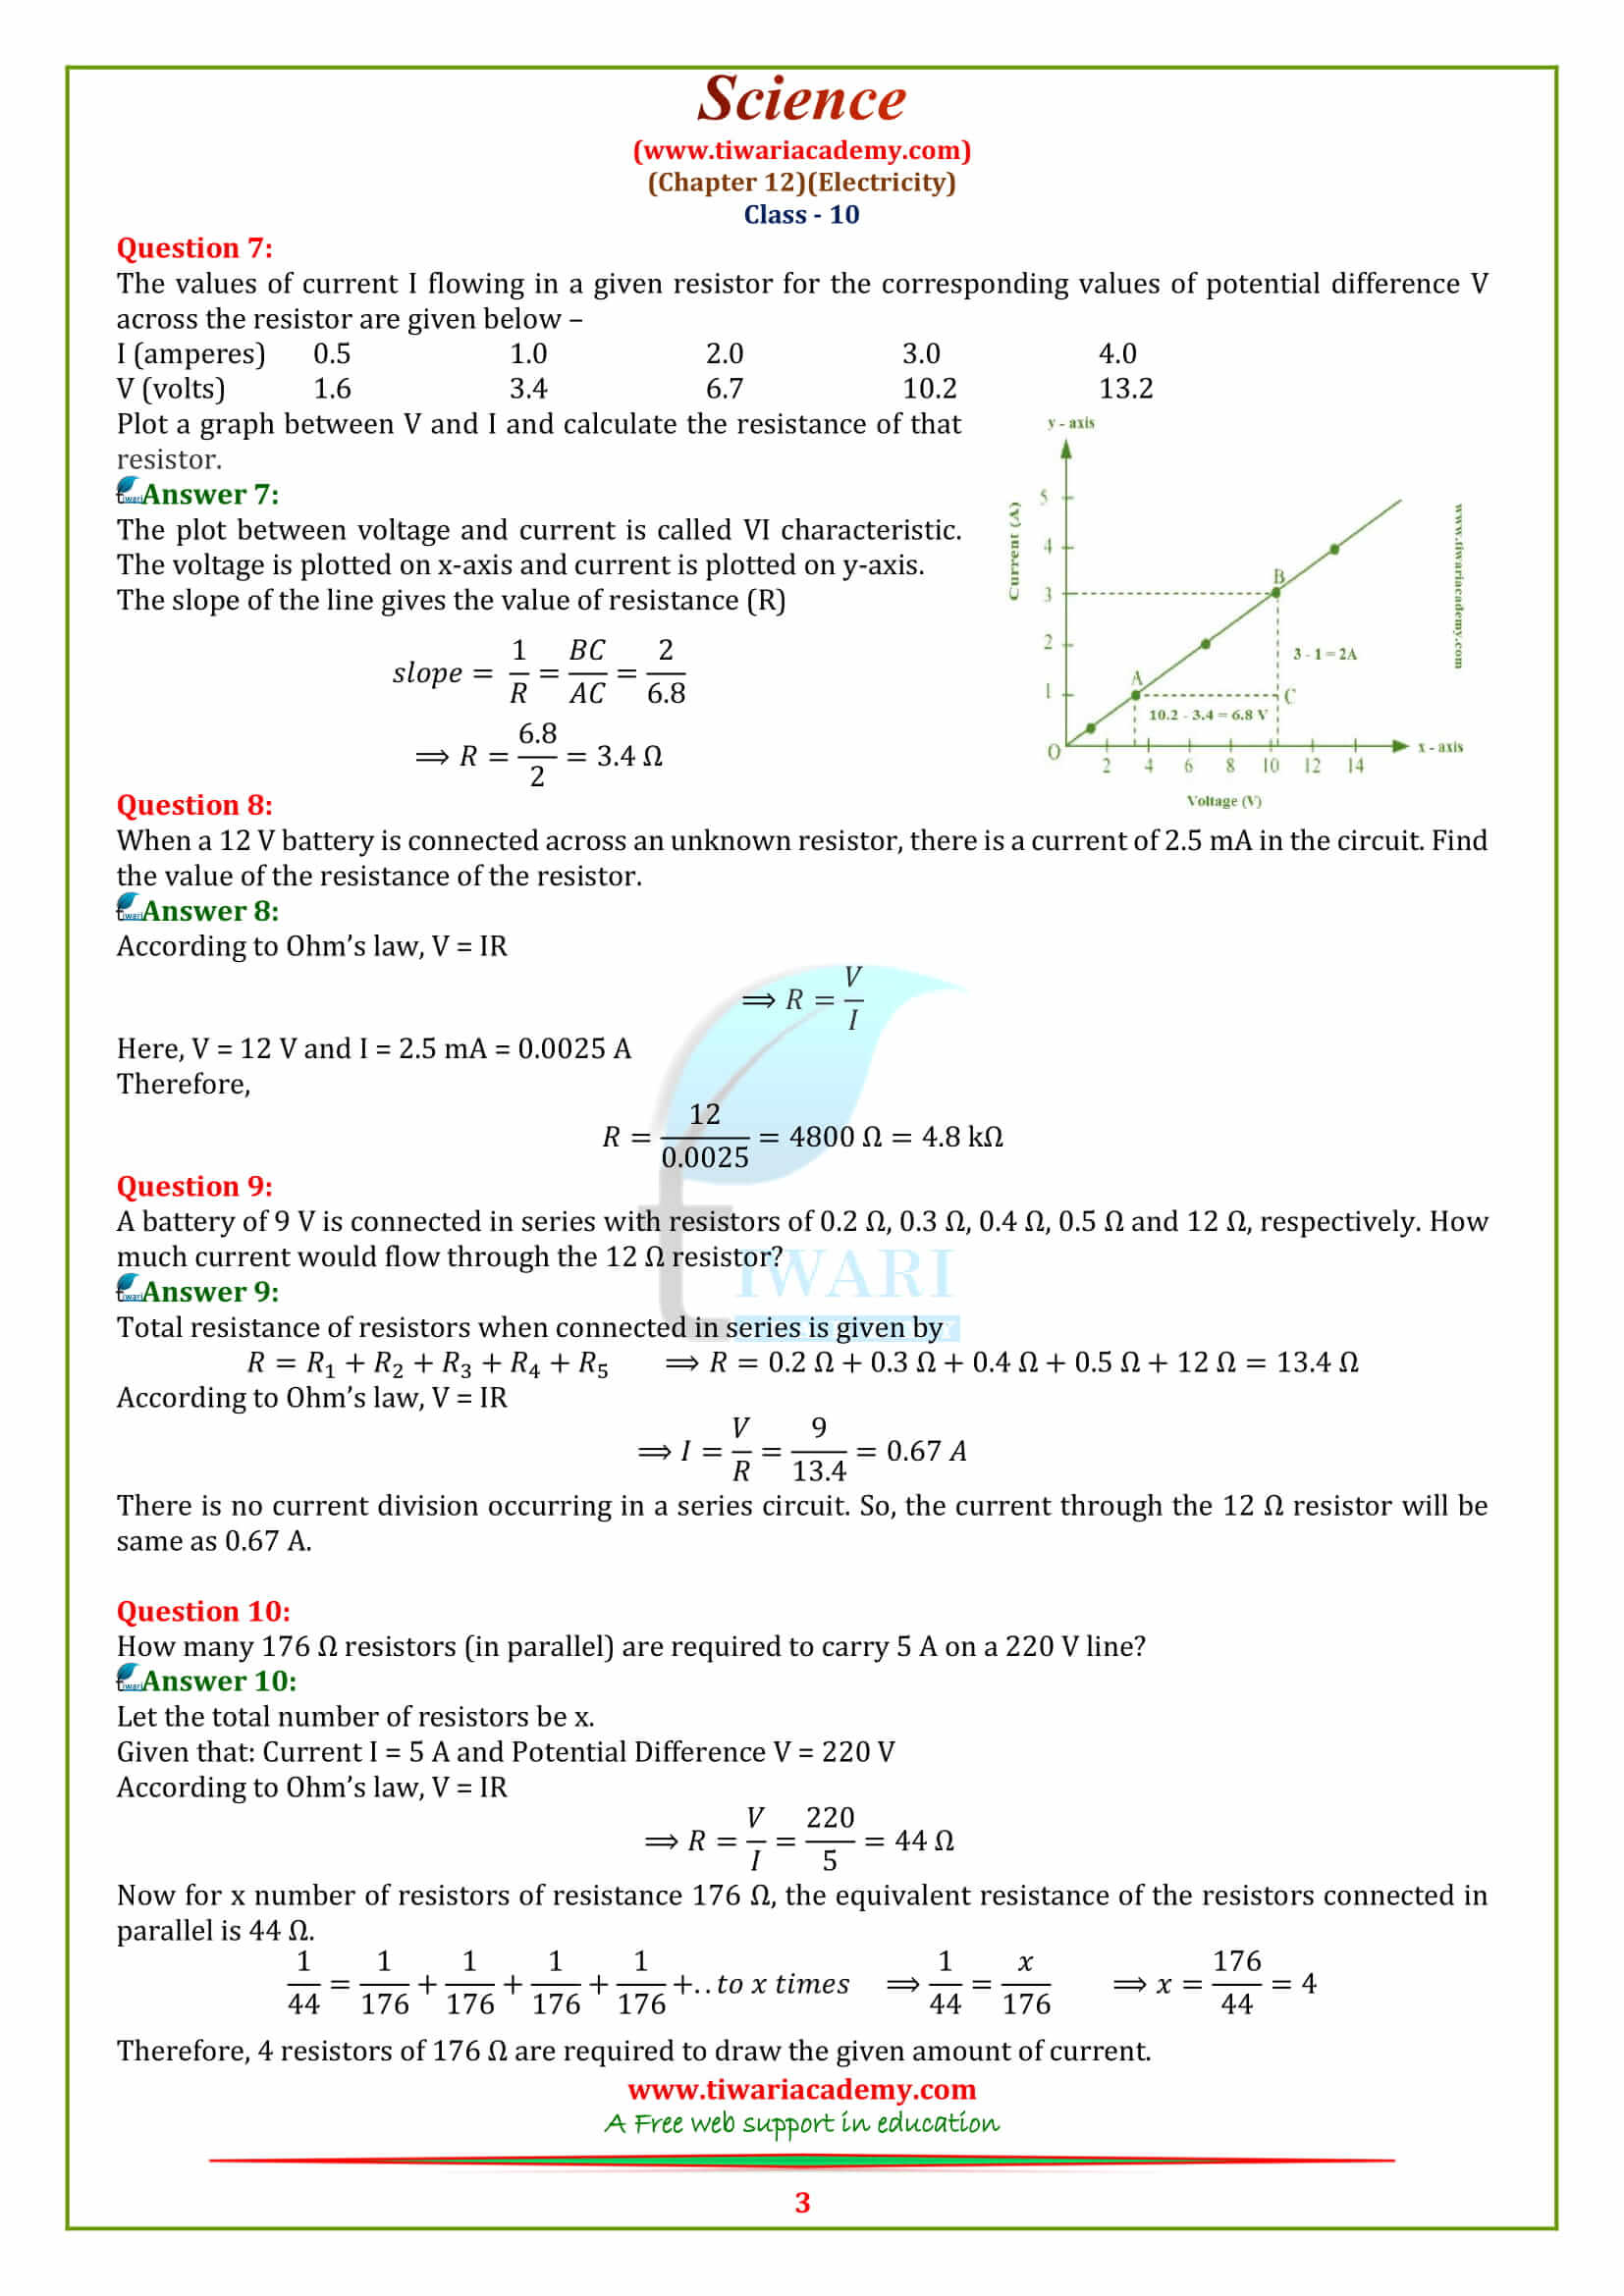 NCERT Solutions for Class 10 Science Chapter 12 Electricity Exercise in pdf form